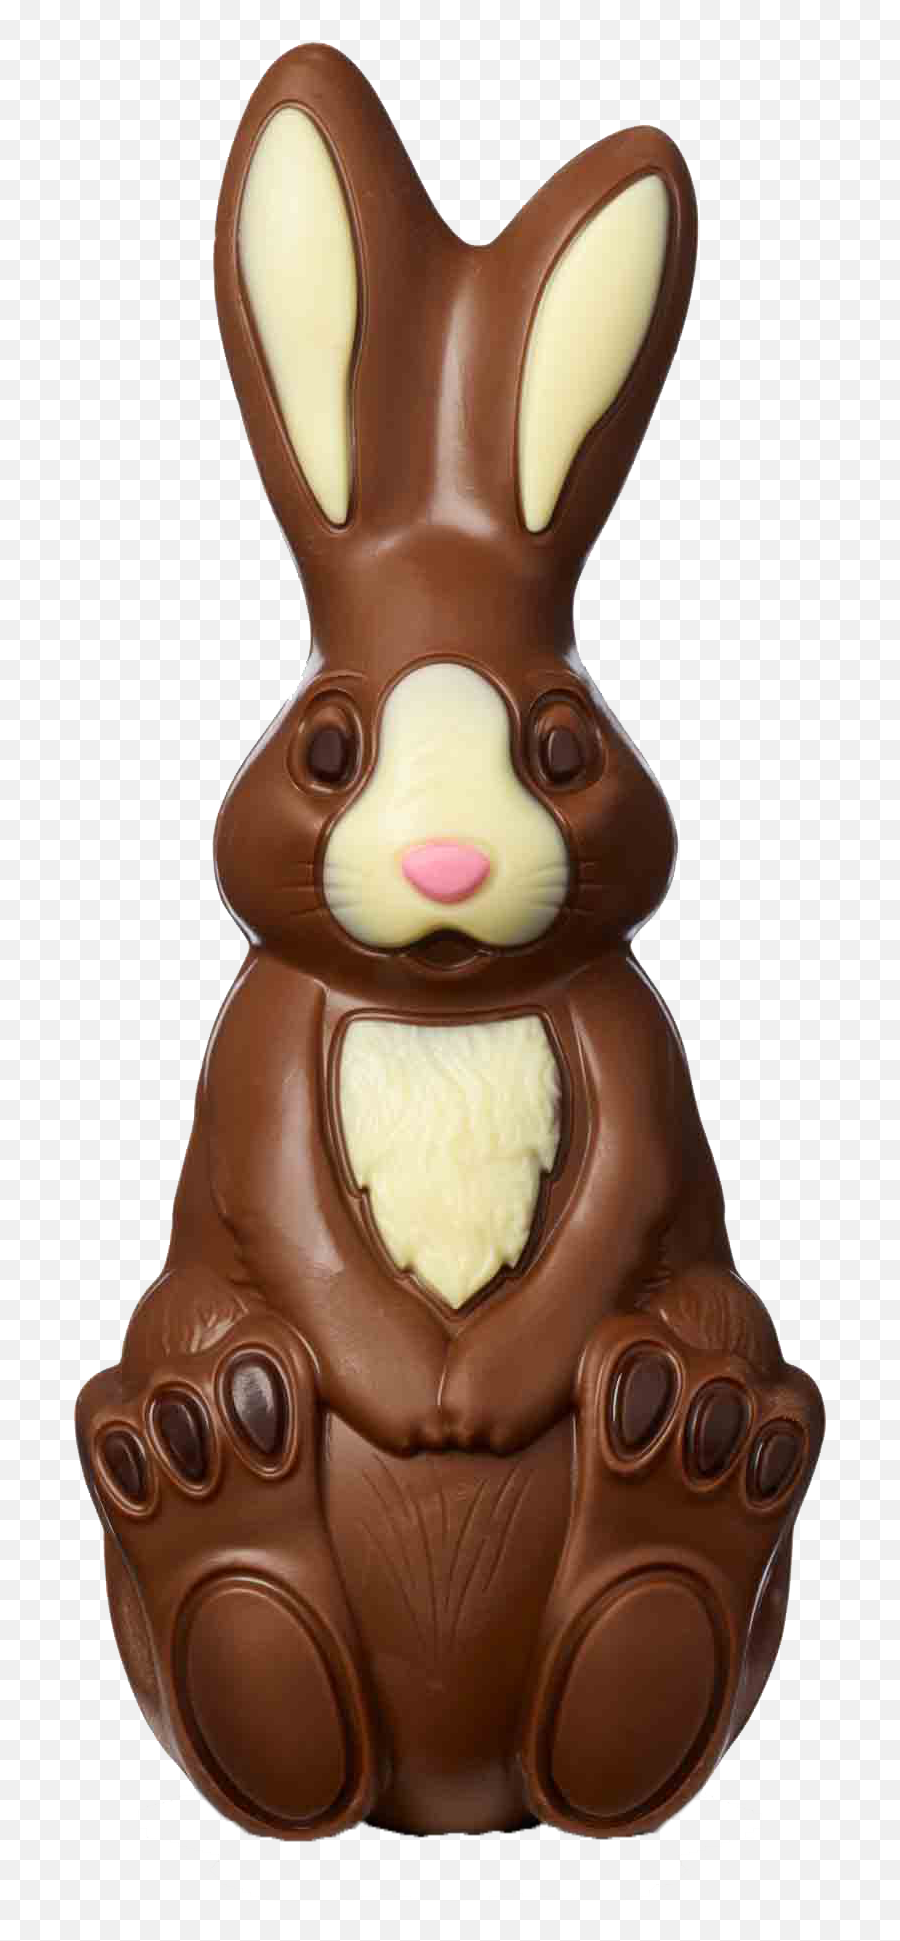 Chocolate Bunny Png Photo - Thorntons Easter Bunny,Chocolate Bunny Png